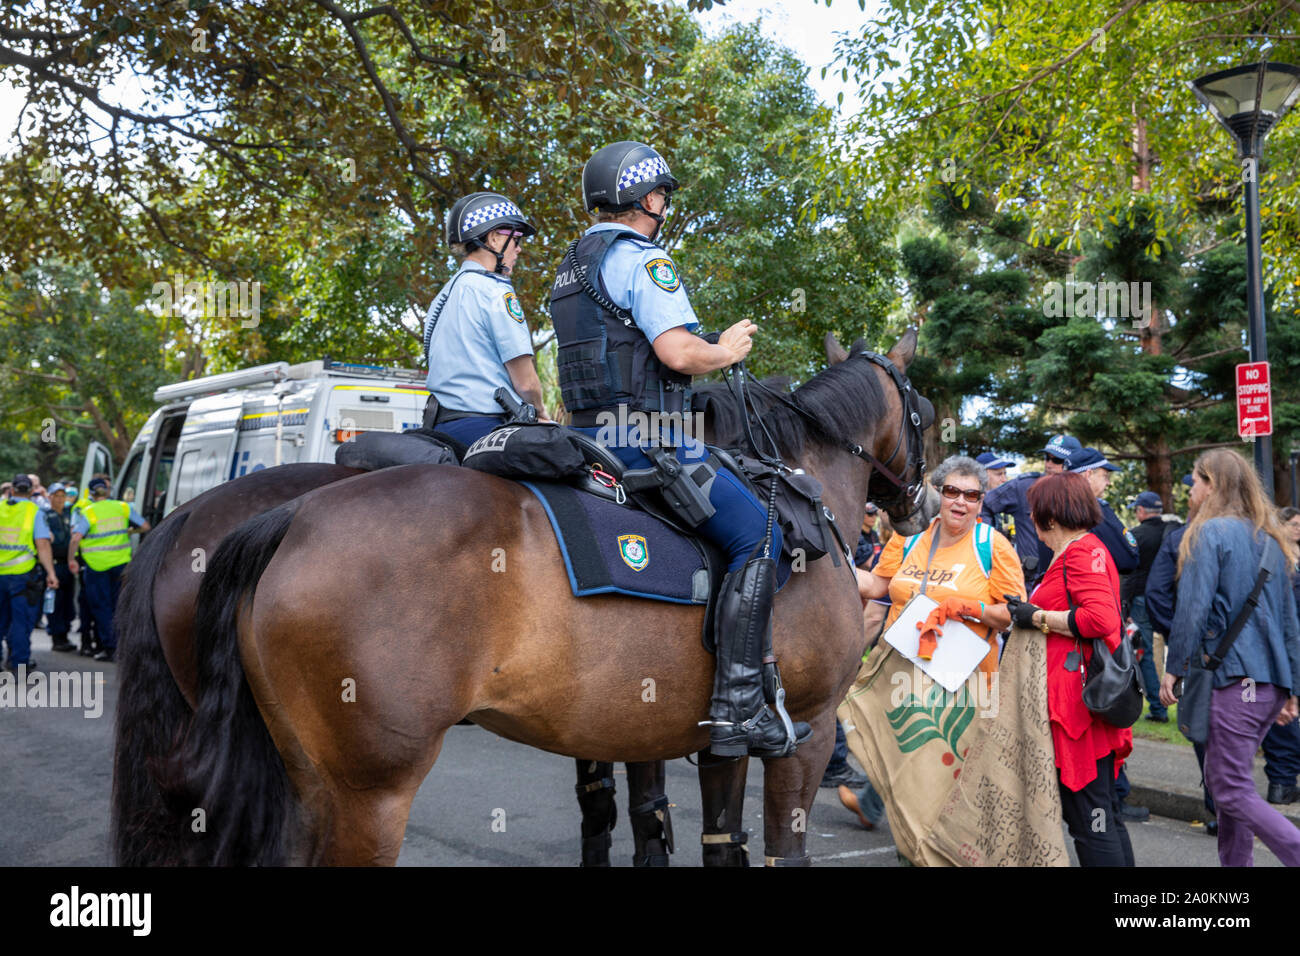 Sydney, female police officers on horses provide crowd control at the Sydney climate change strike rally in Sydney city centre,Australia Stock Photo